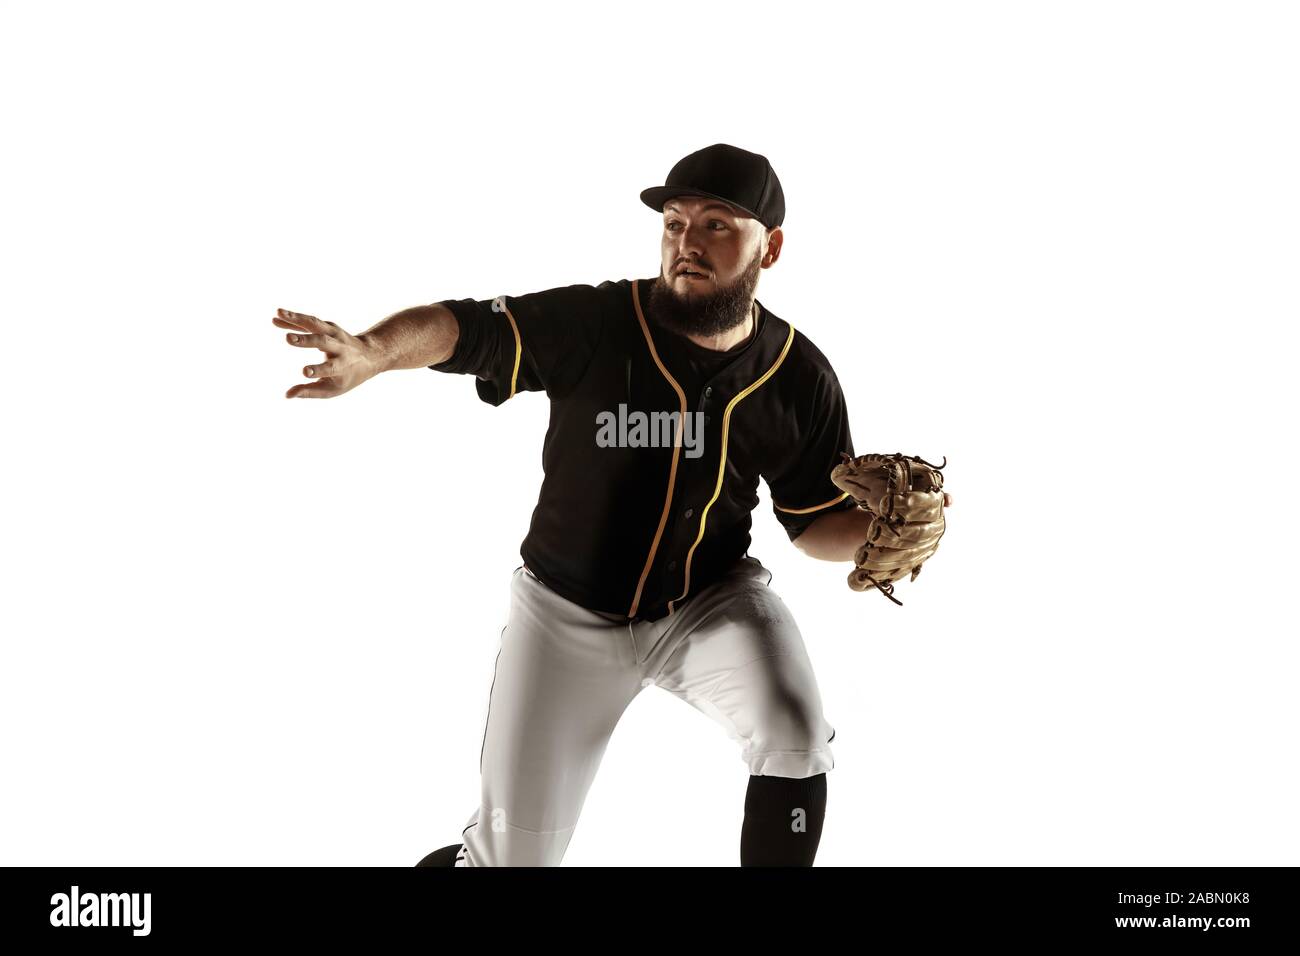 Baseball player, pitcher in a black uniform practicing and training isolated on a white background. Young professional sportsman in action and motion. Healthy lifestyle, sport, movement concept. Stock Photo